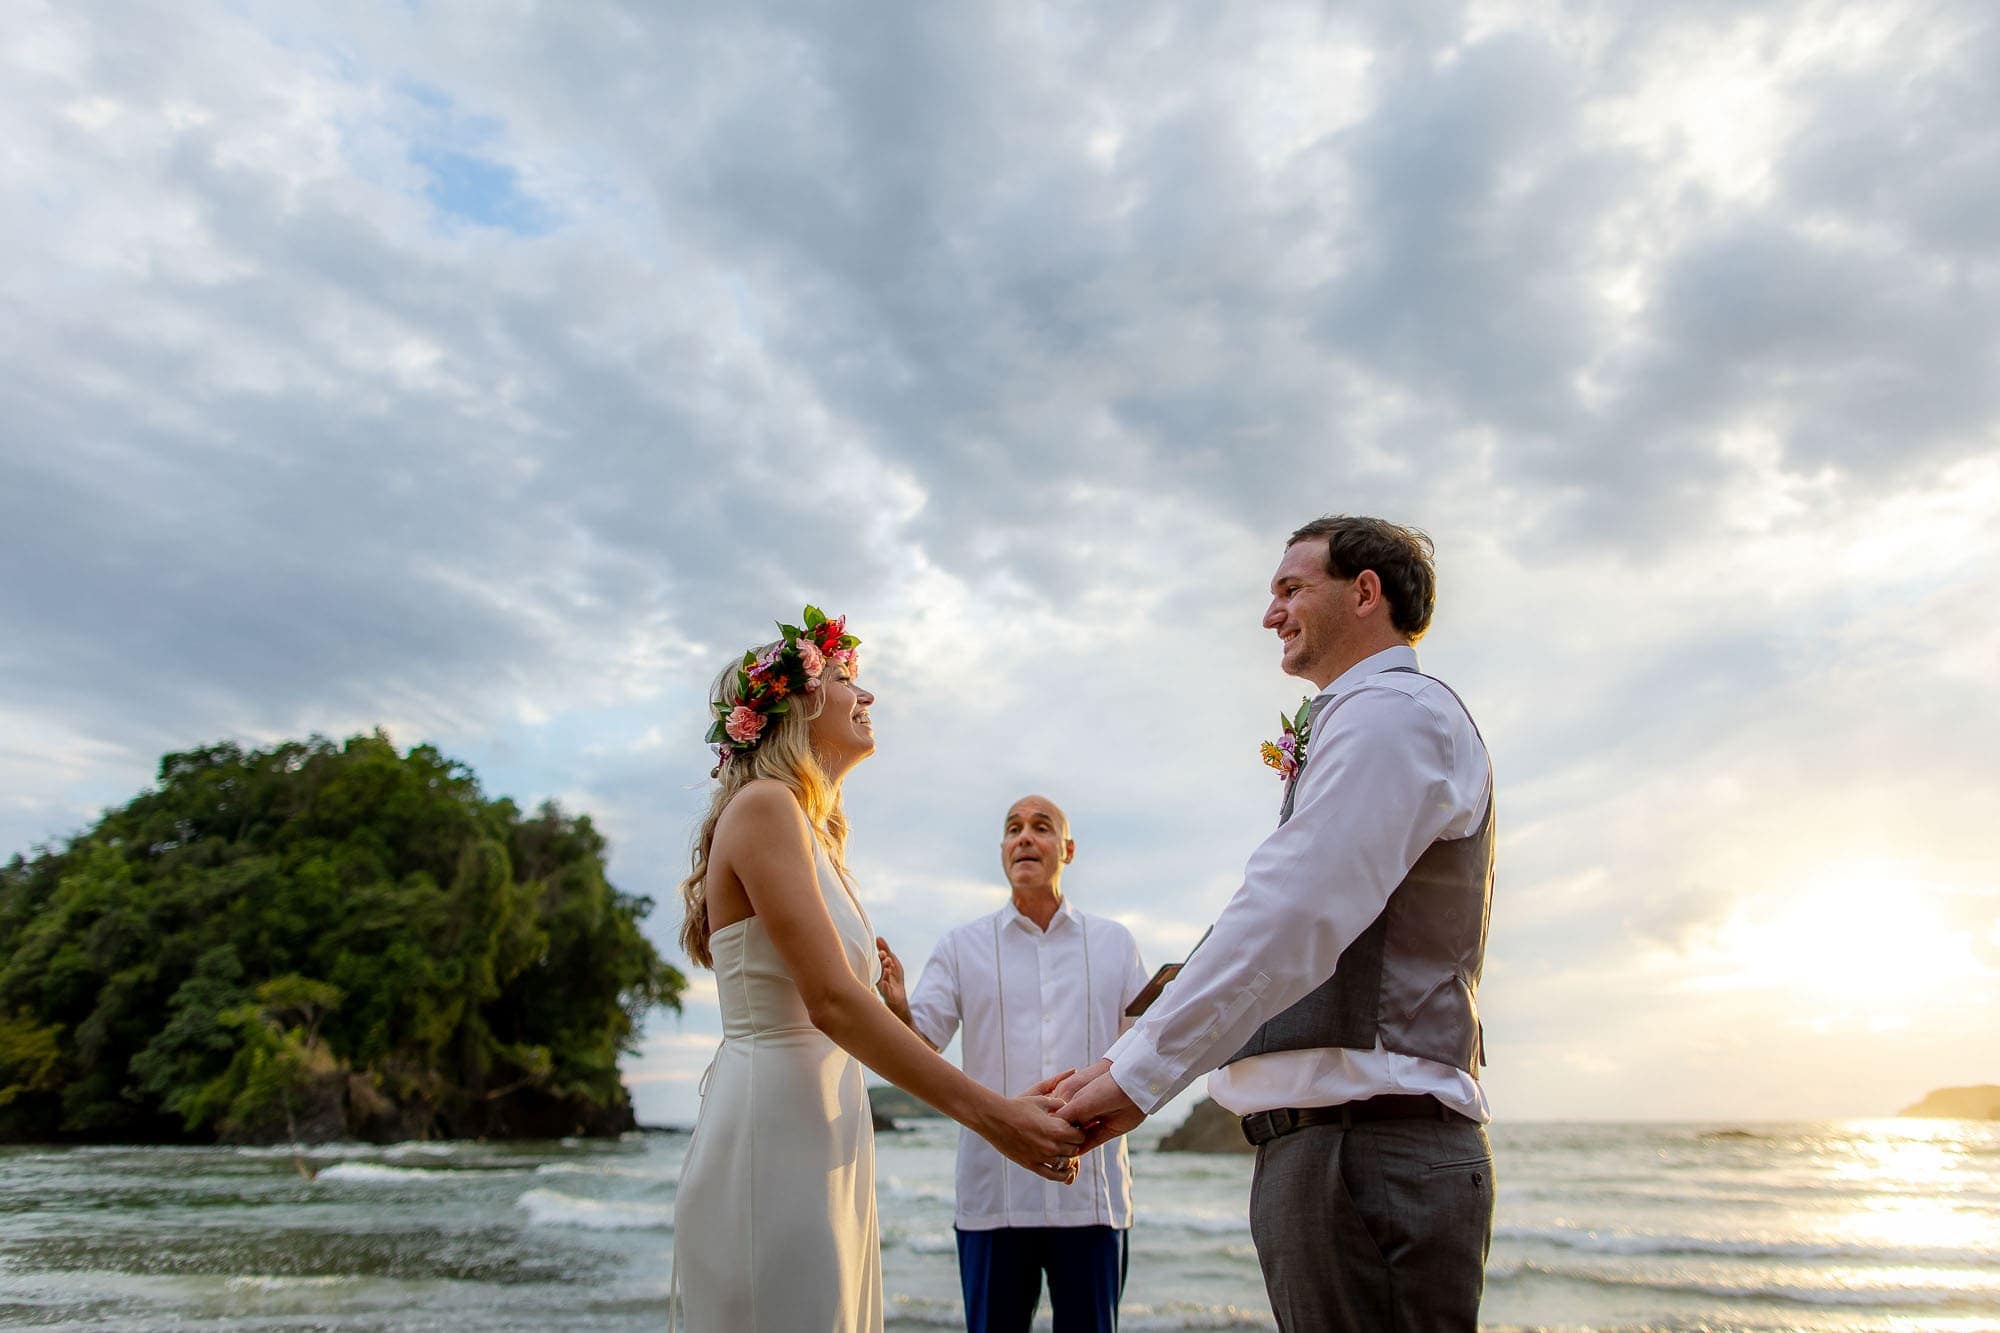 The bride and groom at their simple wedding in Costa Rica